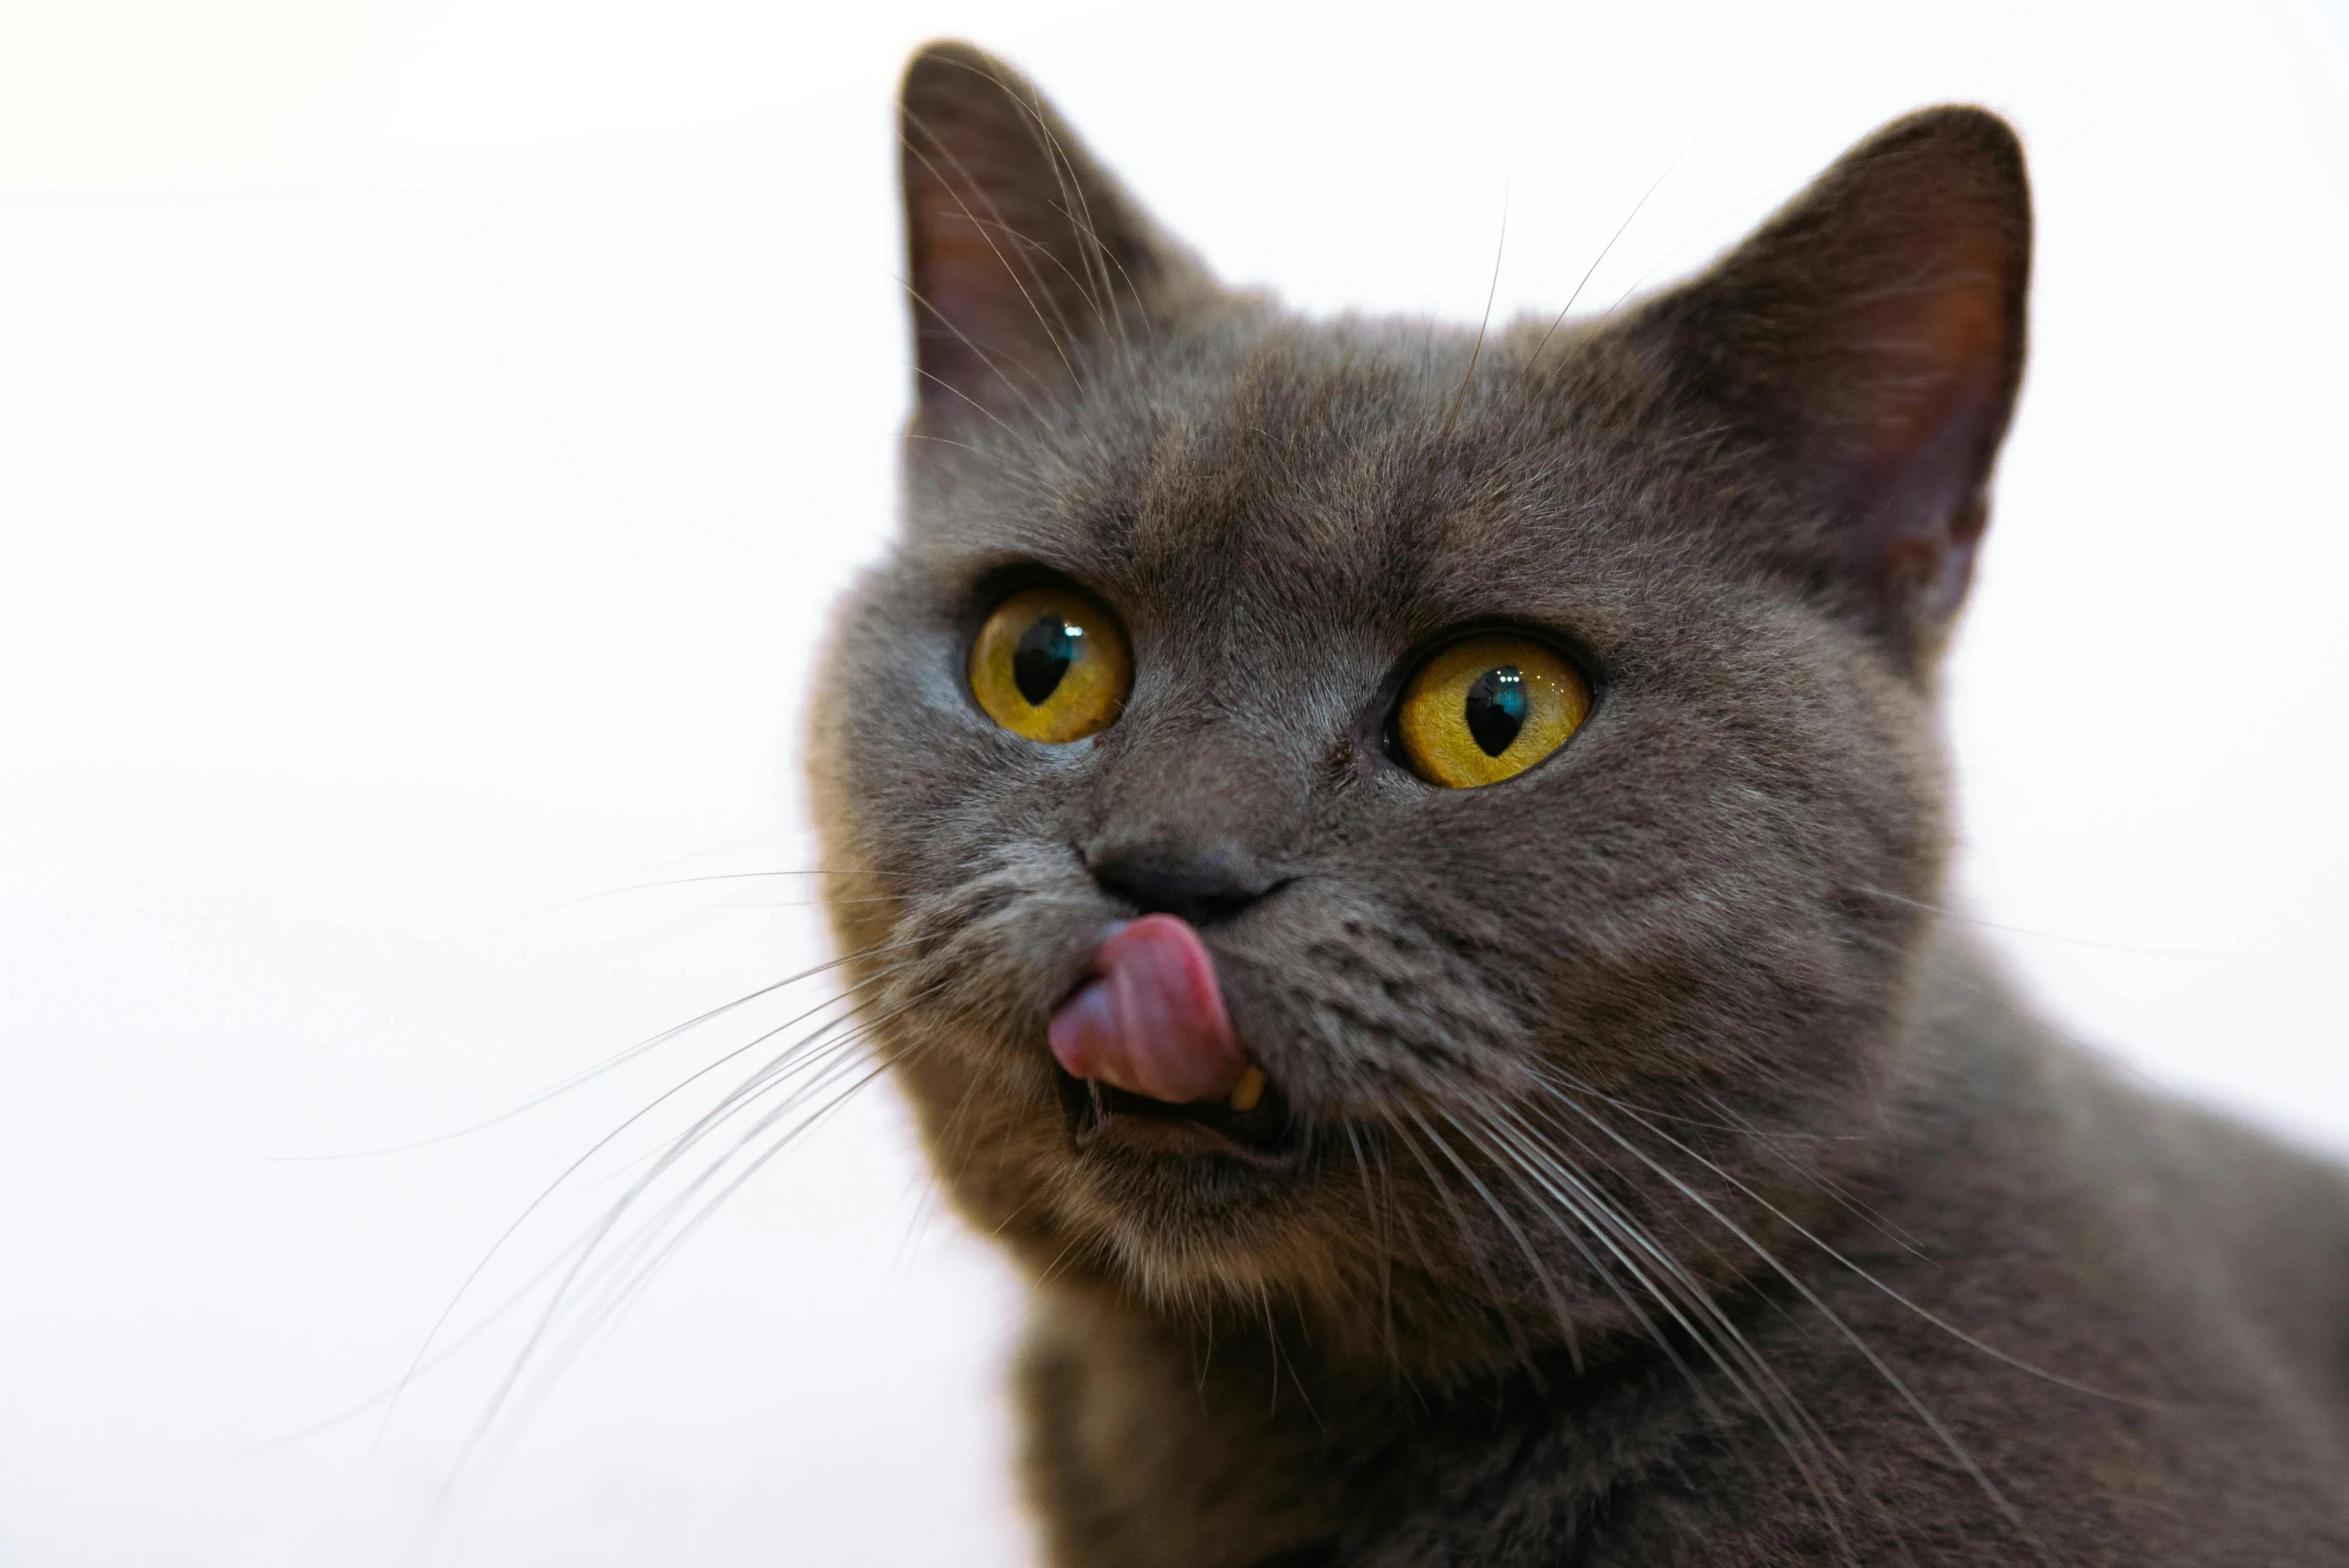 a cat has its tongue hanging out and looks up